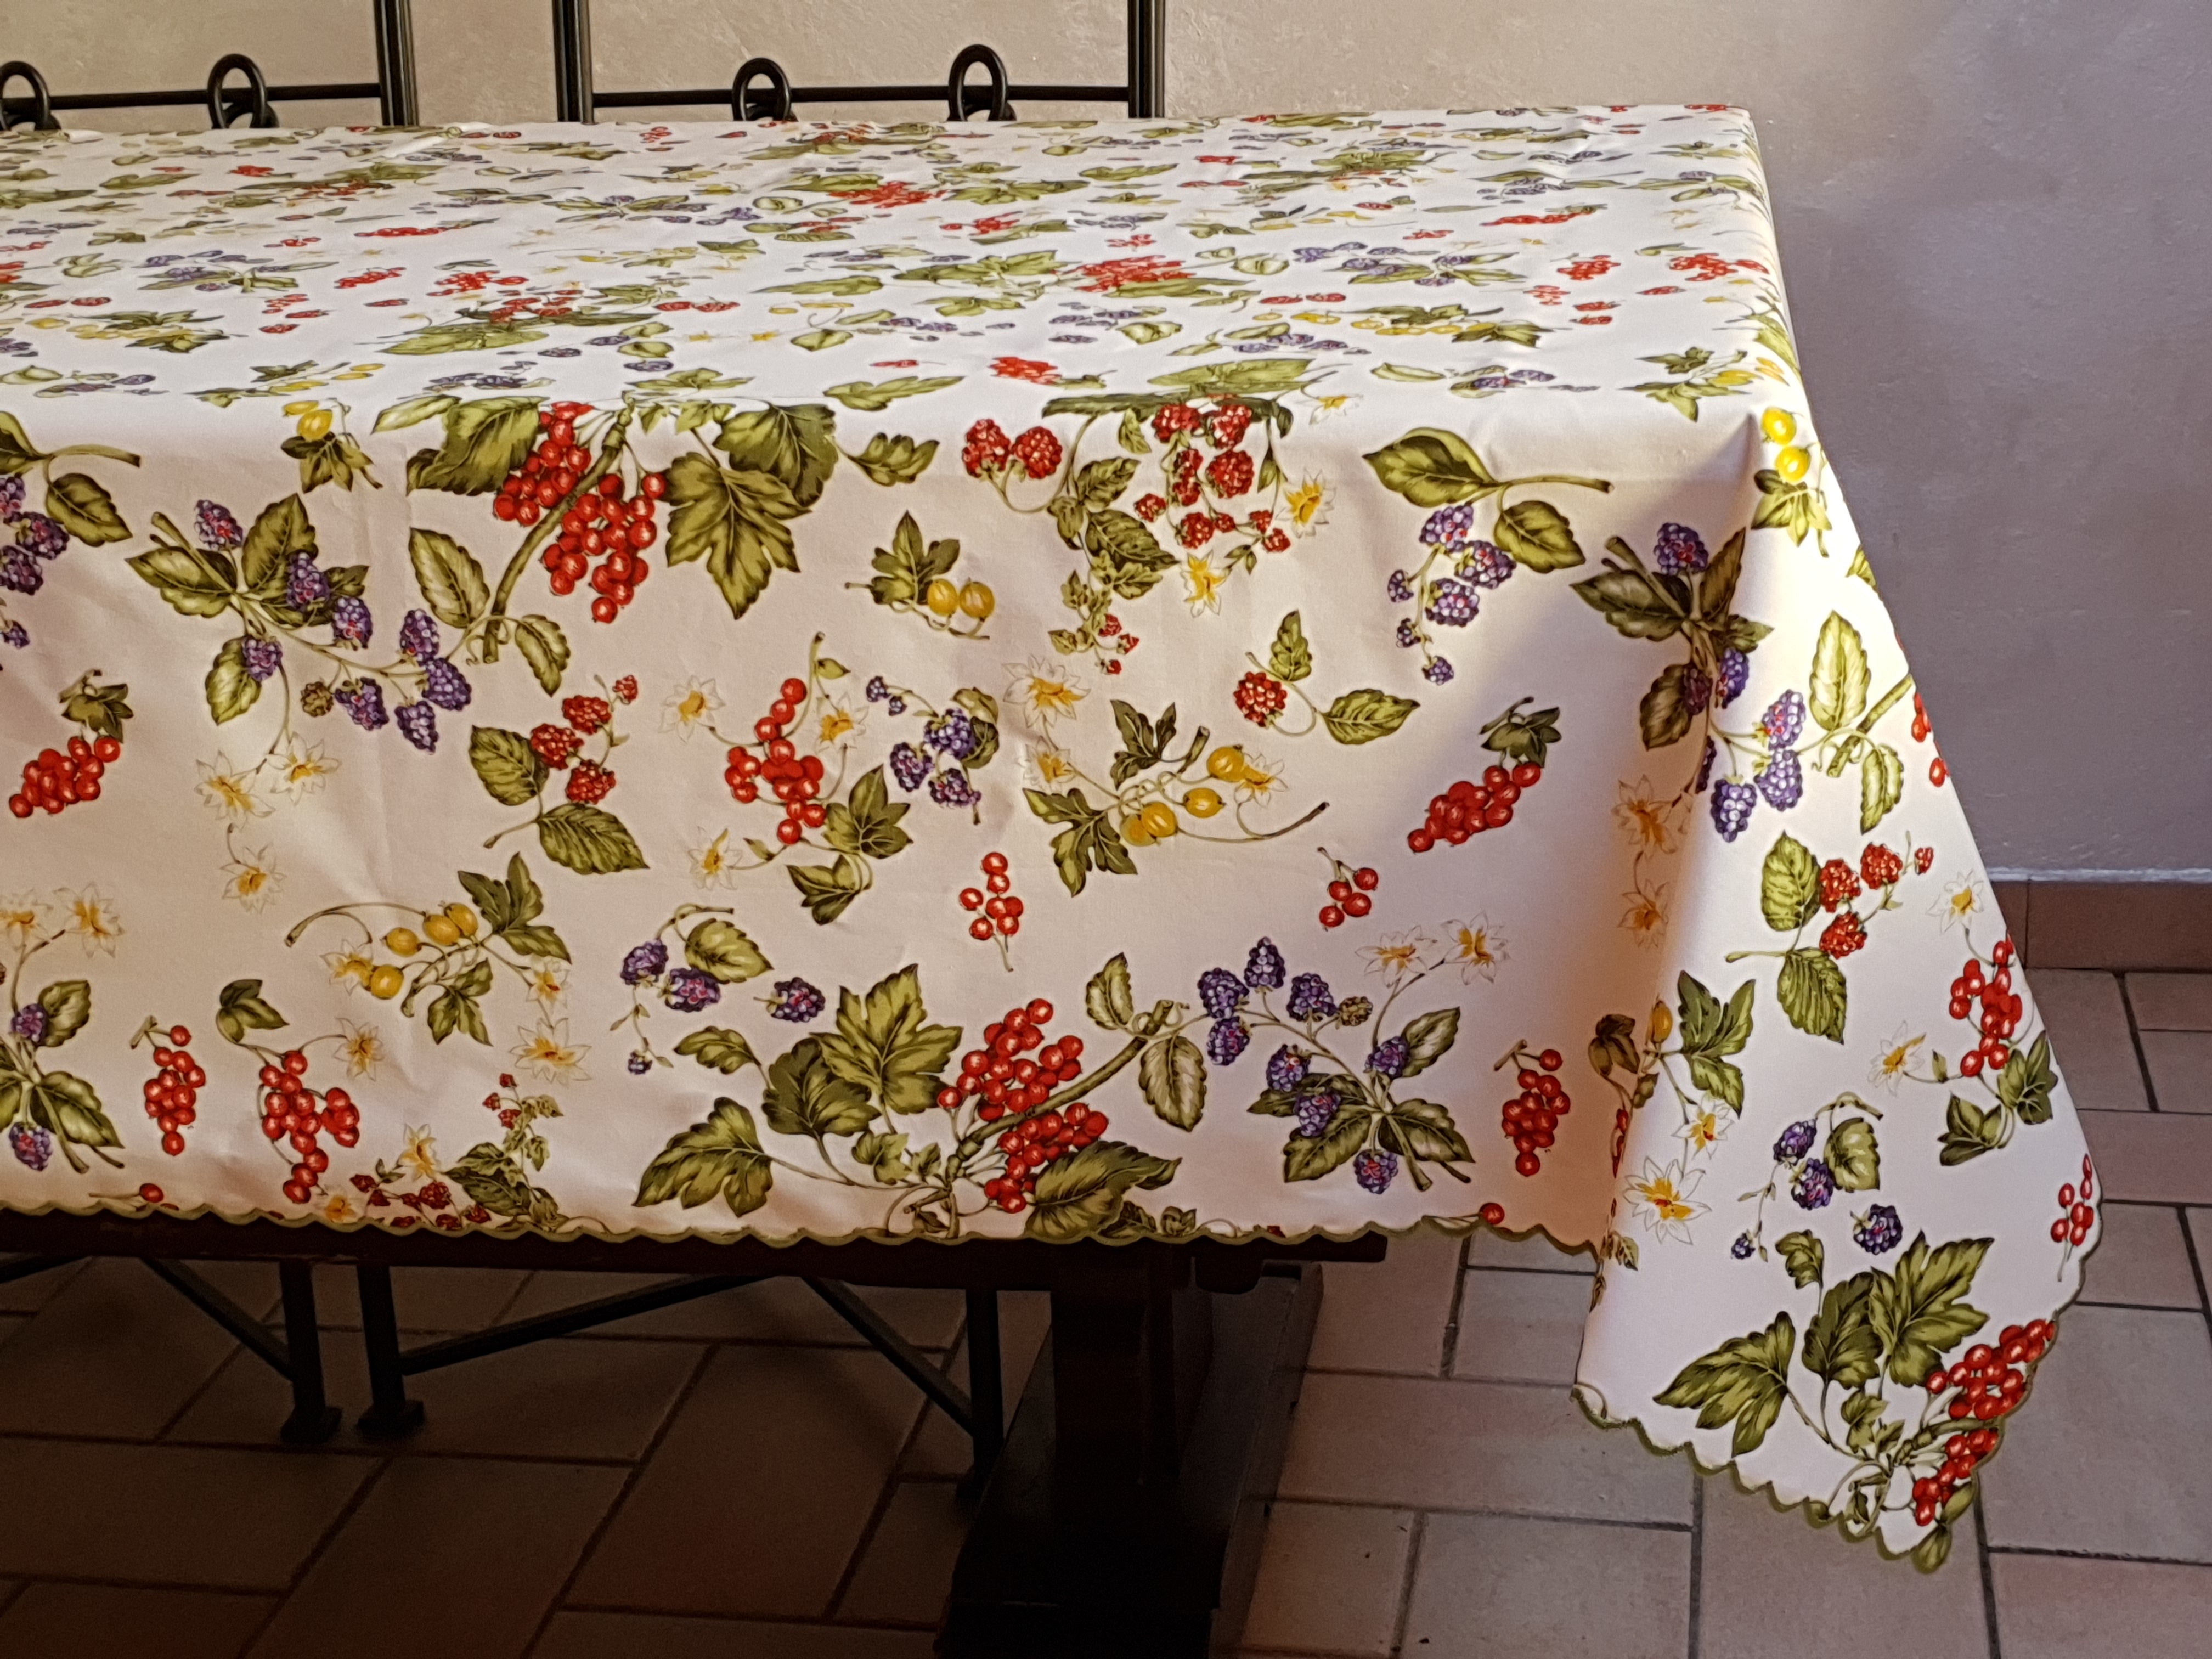 Berries Tablecloth Tuscan Tablecloths